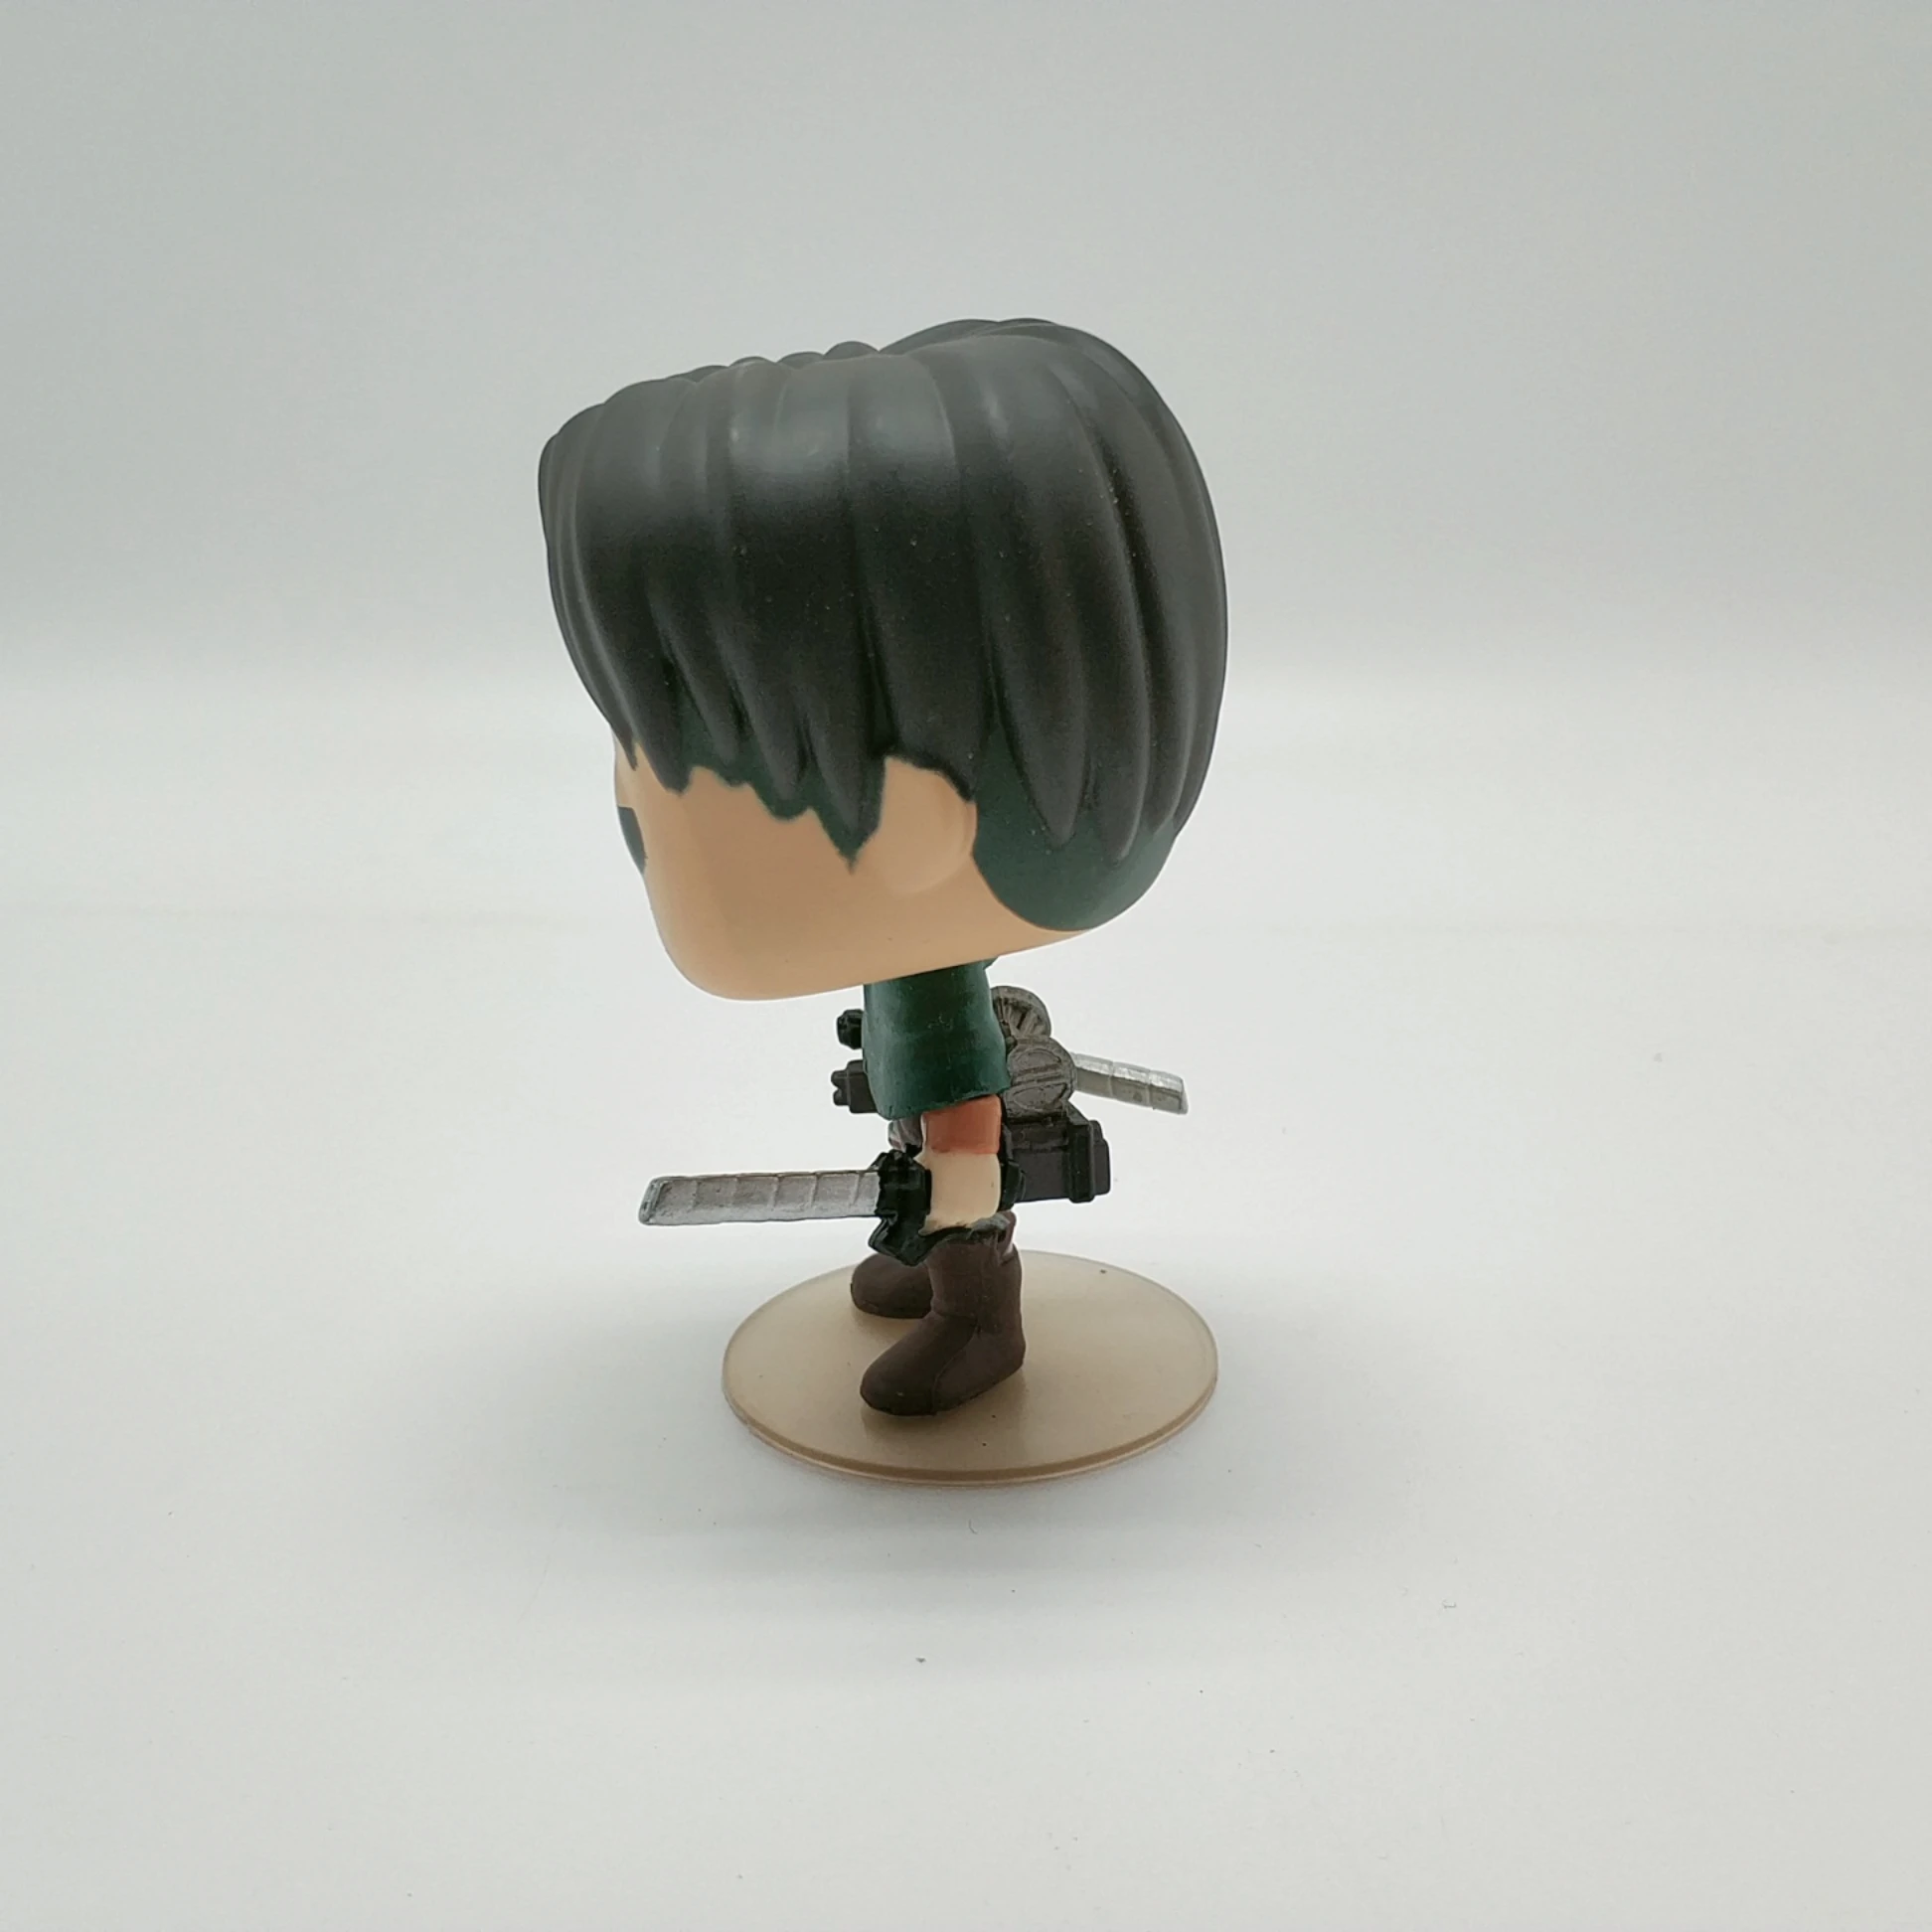 Funko pop anime attack on titan levi ackerman action figure Attack On Titan Funko Pop Levi Ackerman 235 Action Figure Toys Mankind S Strongest Soldier Model Collection Vinyl Doll Buy Funko Pop Levi 235 Levi Action Figure Toys Attack On Titan Collection Model Product